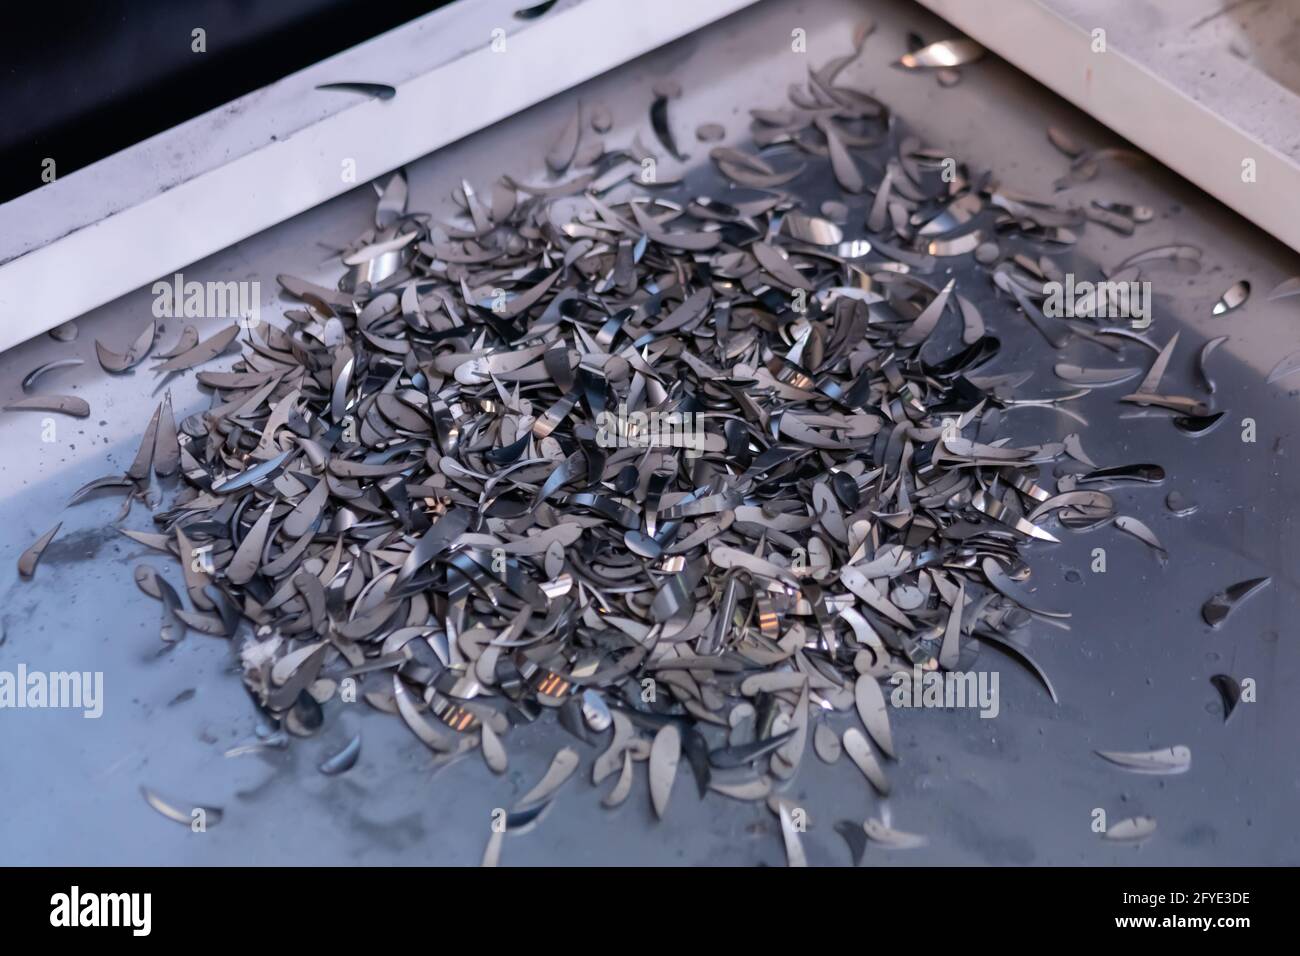 Lots of metal debris, chips, shavings after working of laser cutting machine Stock Photo